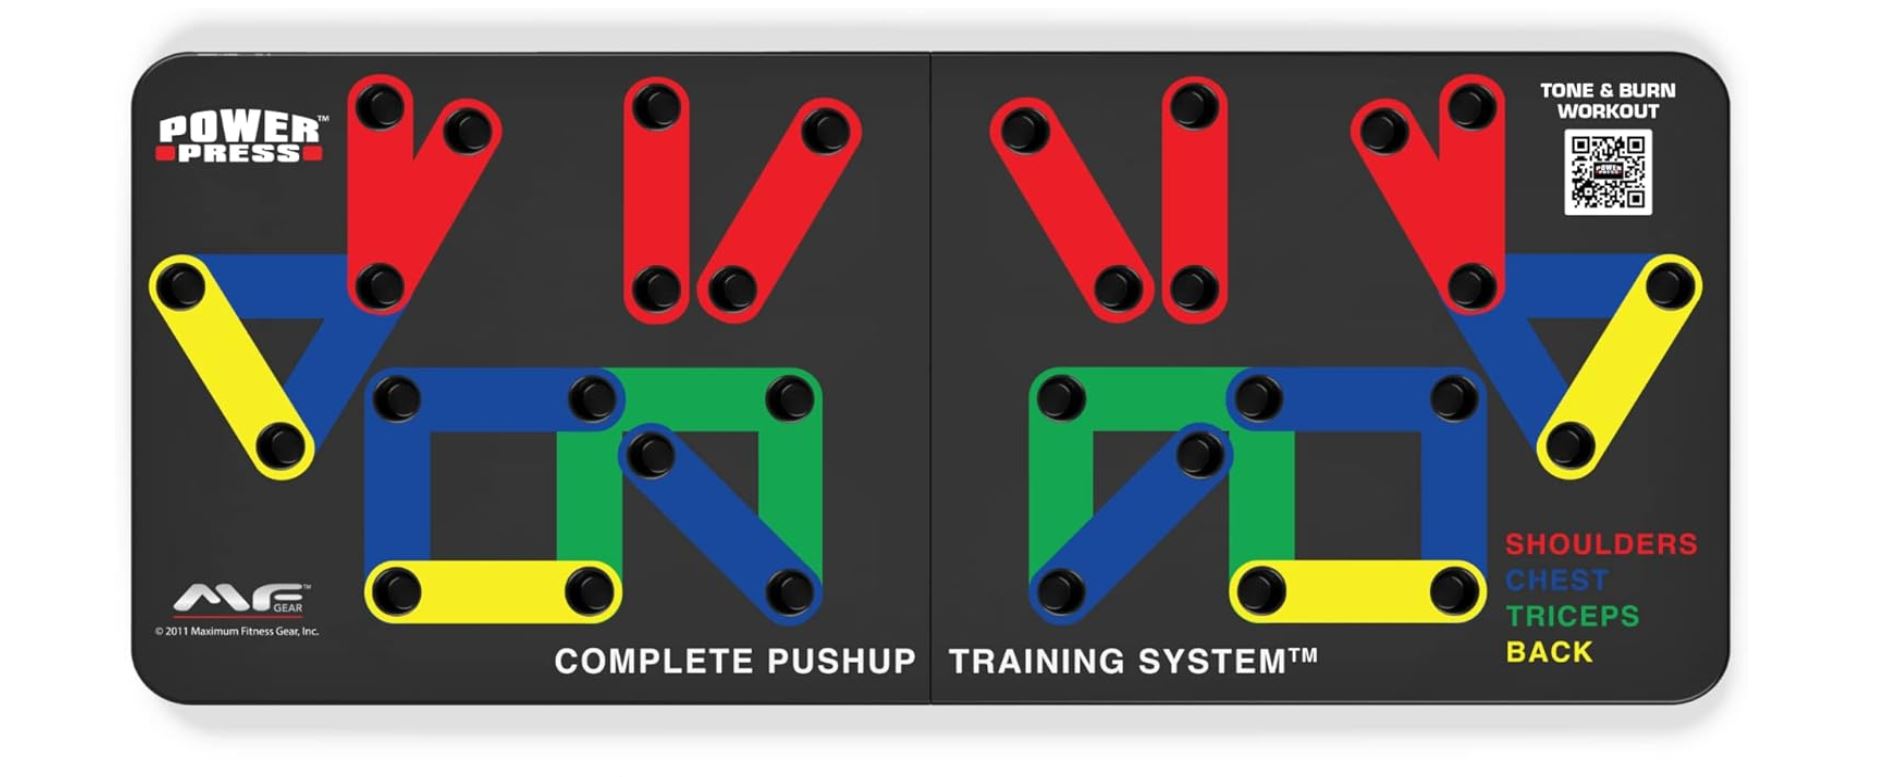 Power Press Push Up Board Review: The Ultimate Workout Buddy